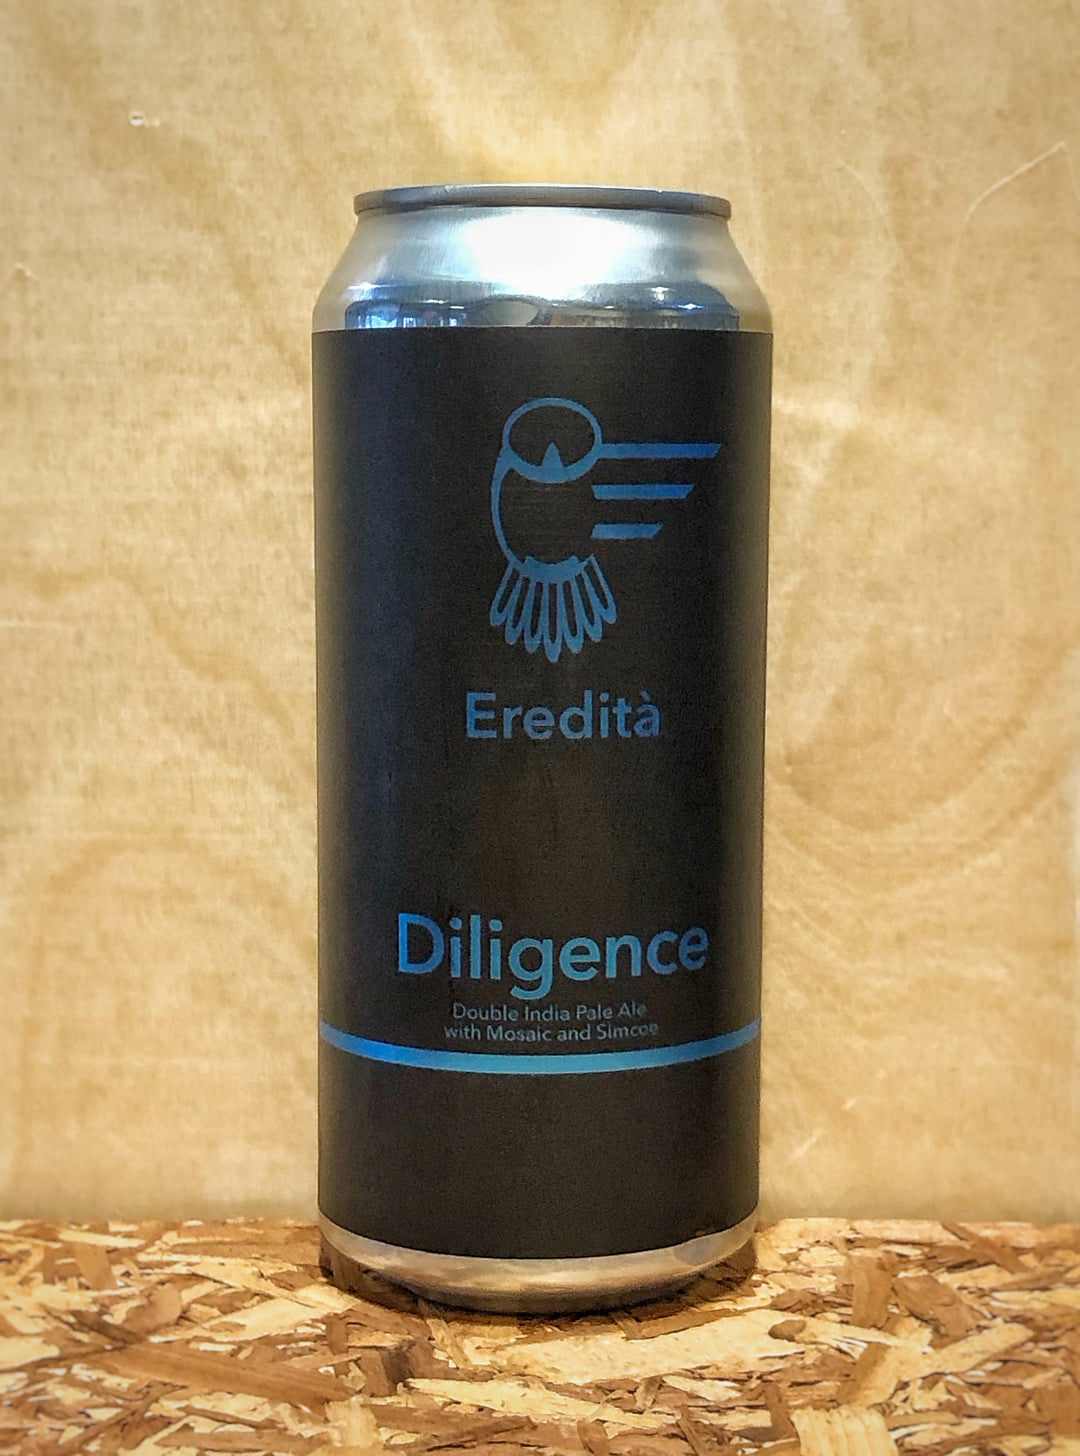 Eredità 'Diligence' Double India Pale Ale with Mosaic and Simcoe Hops (North Haven, CT)